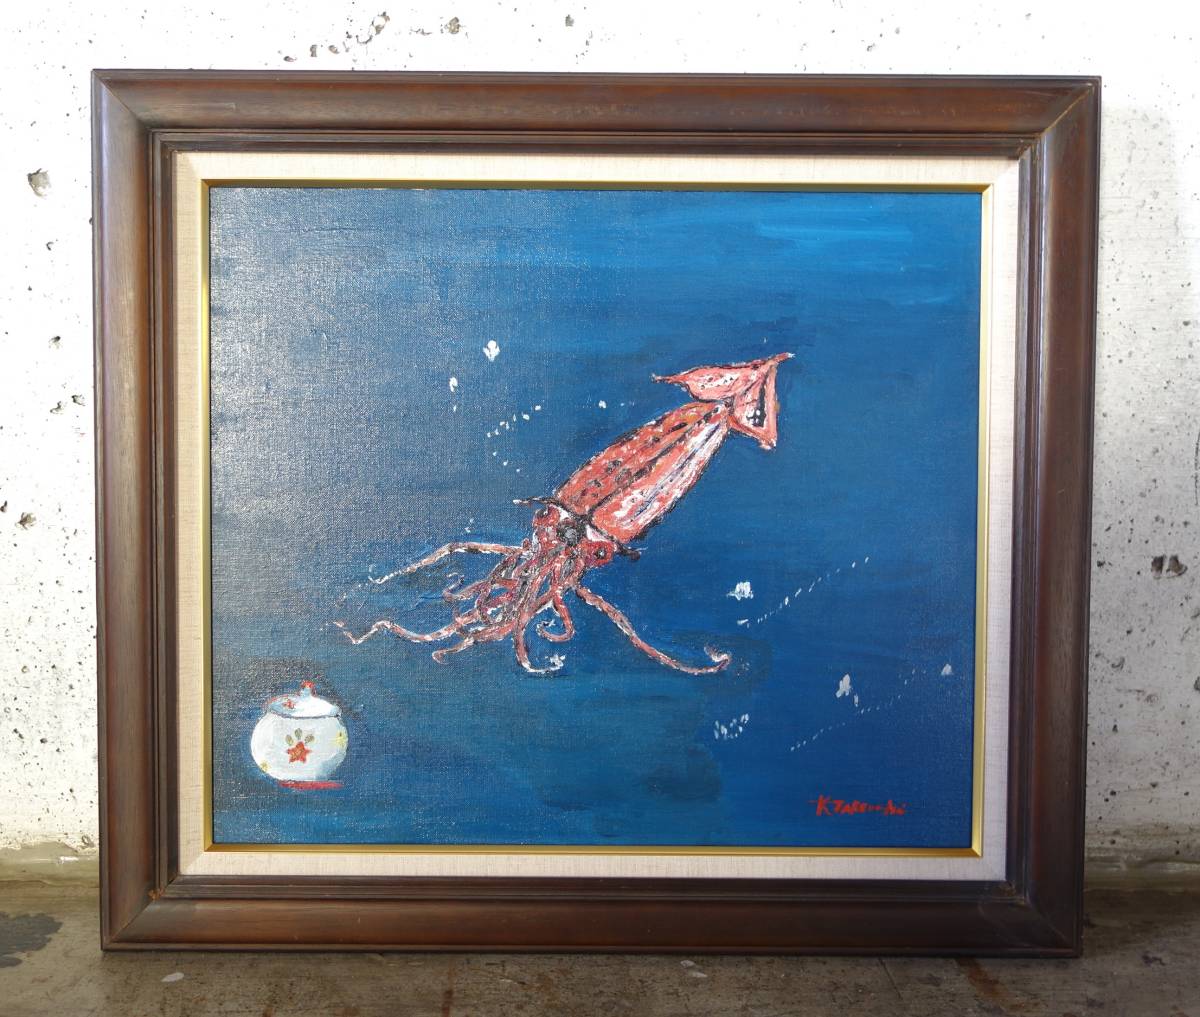  modern times art art * oil painting oil painting * work name of product summer ... salt from go in squid ..* author unknown K.TAKEUCHI autograph equipped *F10 number 530×455.